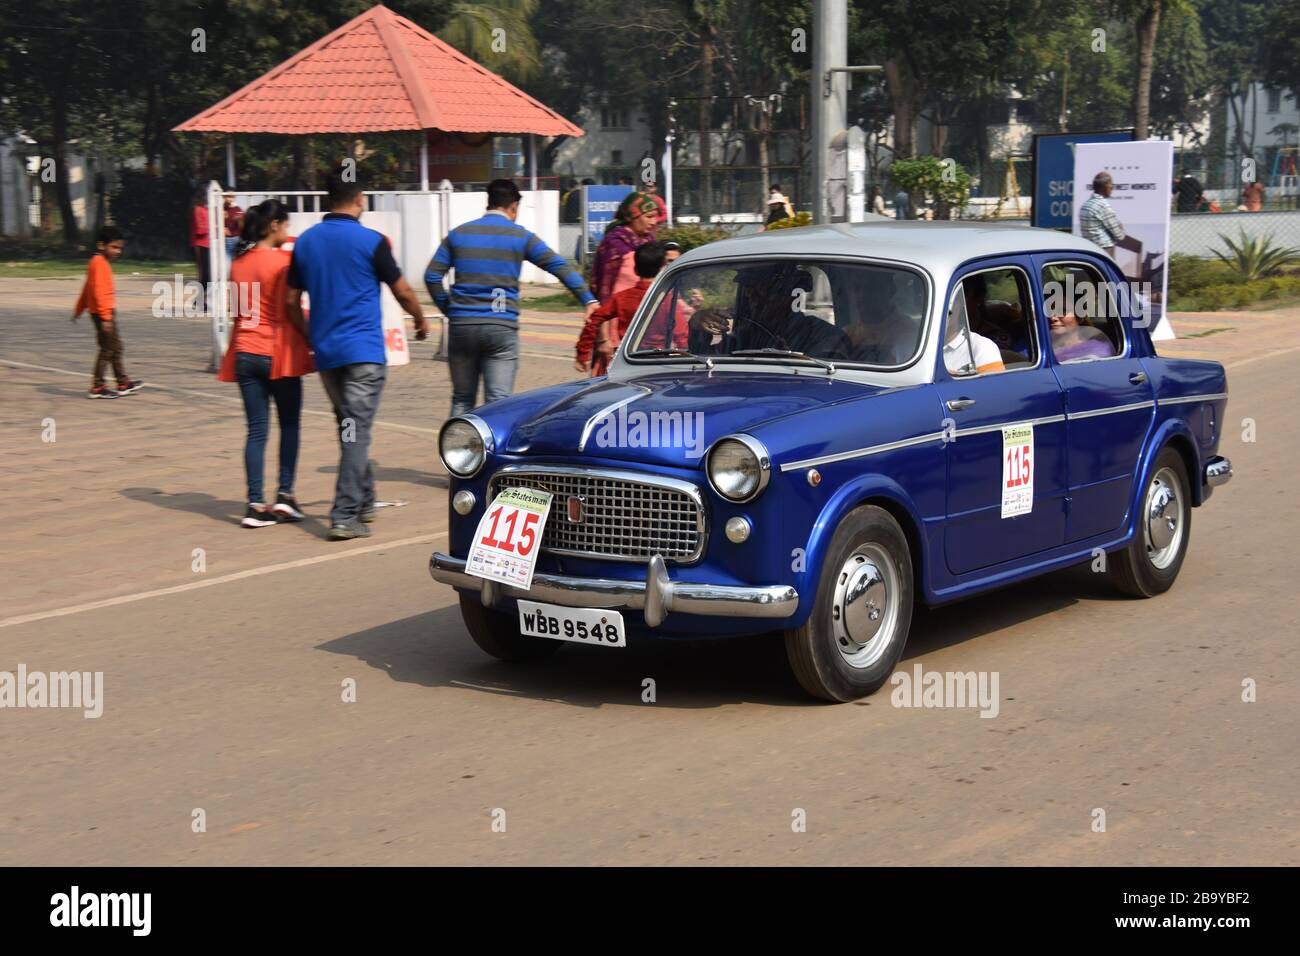 1962 Fiat car with 11 hp and 4 cylinder engine. India WBB 9548. Stock Photo